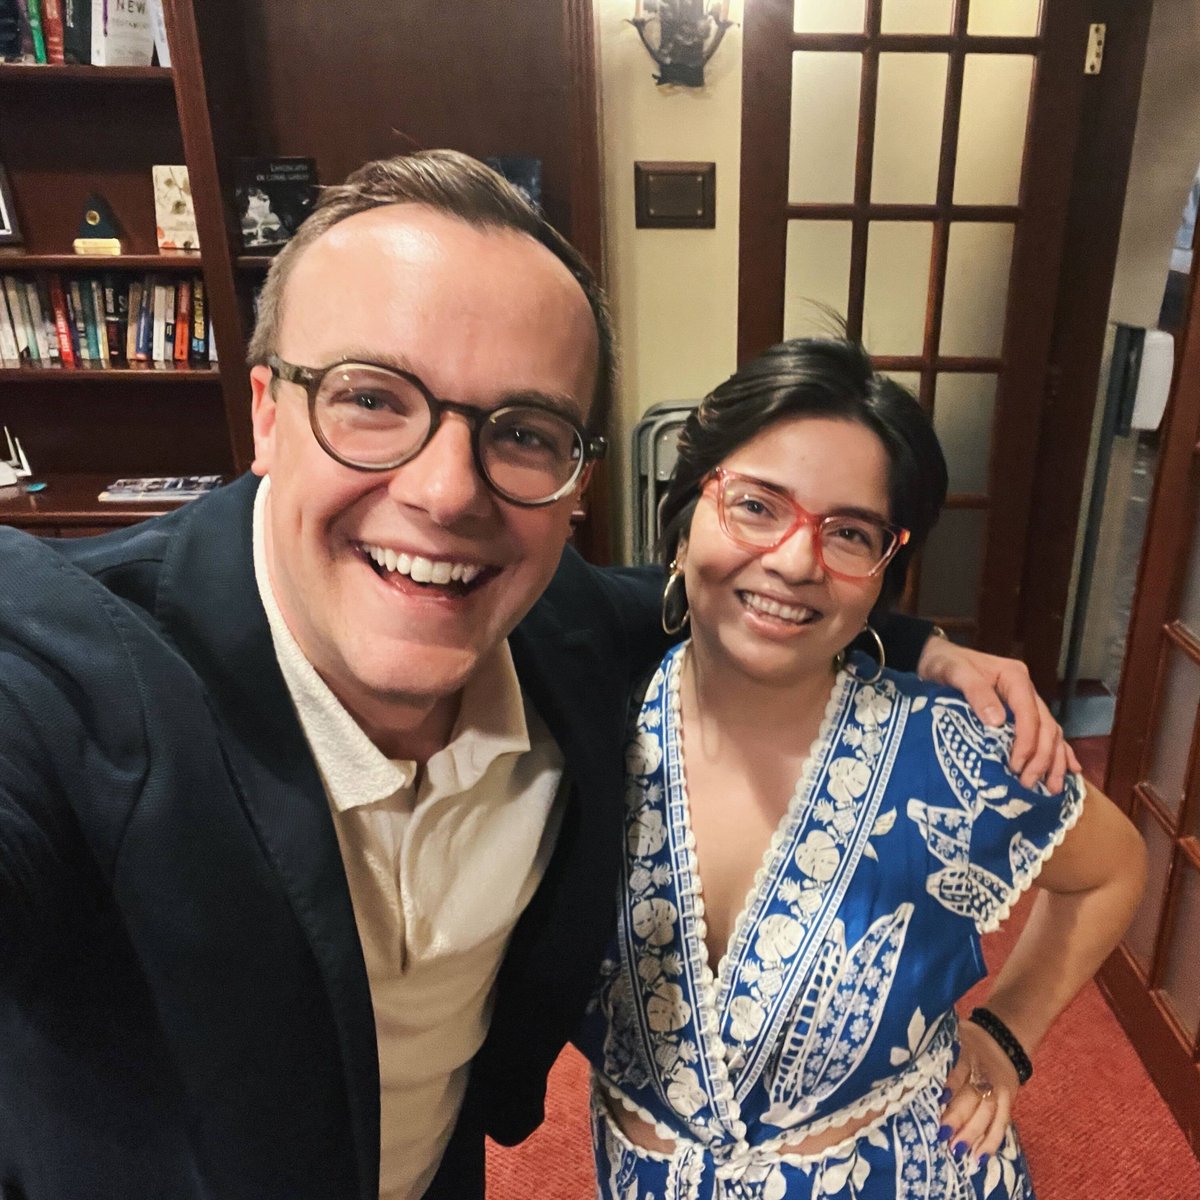 Yesterday, #thetaskforce’s Deputy Executive Director, @soymayrahidalgo, lead a discussion with @Chasten for his newest #NYTBestsller, I Have to Something to Tell You: For Young Adults. 

🟣 To learn more: chastenwrites.com